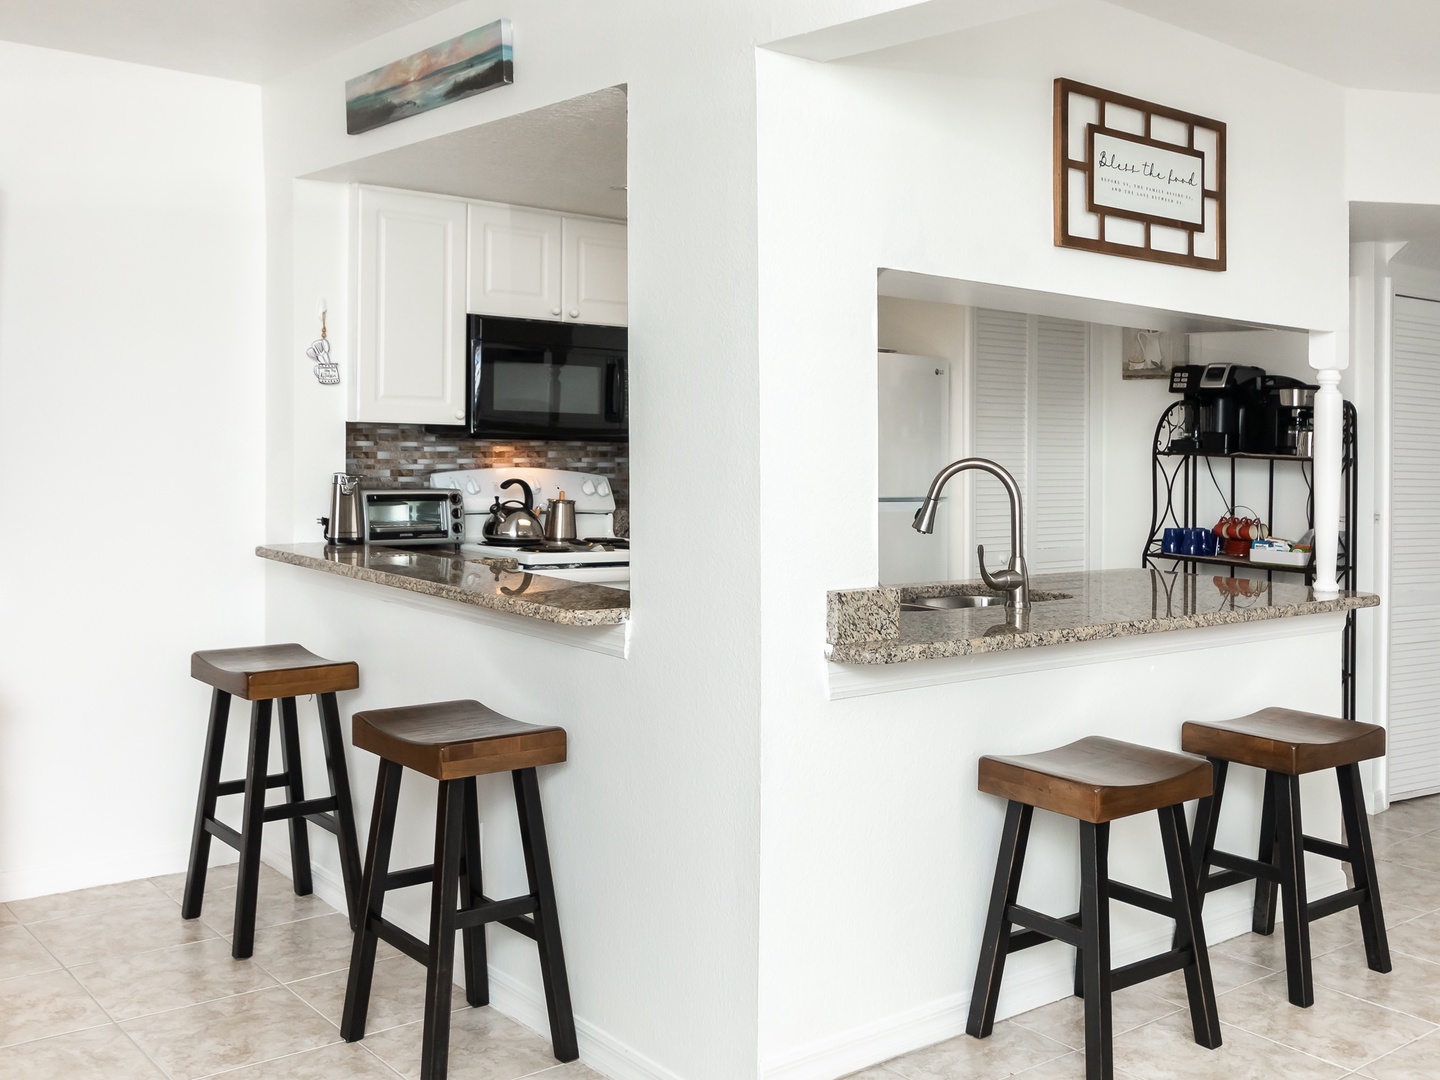 Fully equipped kitchen with barstool seating for 4